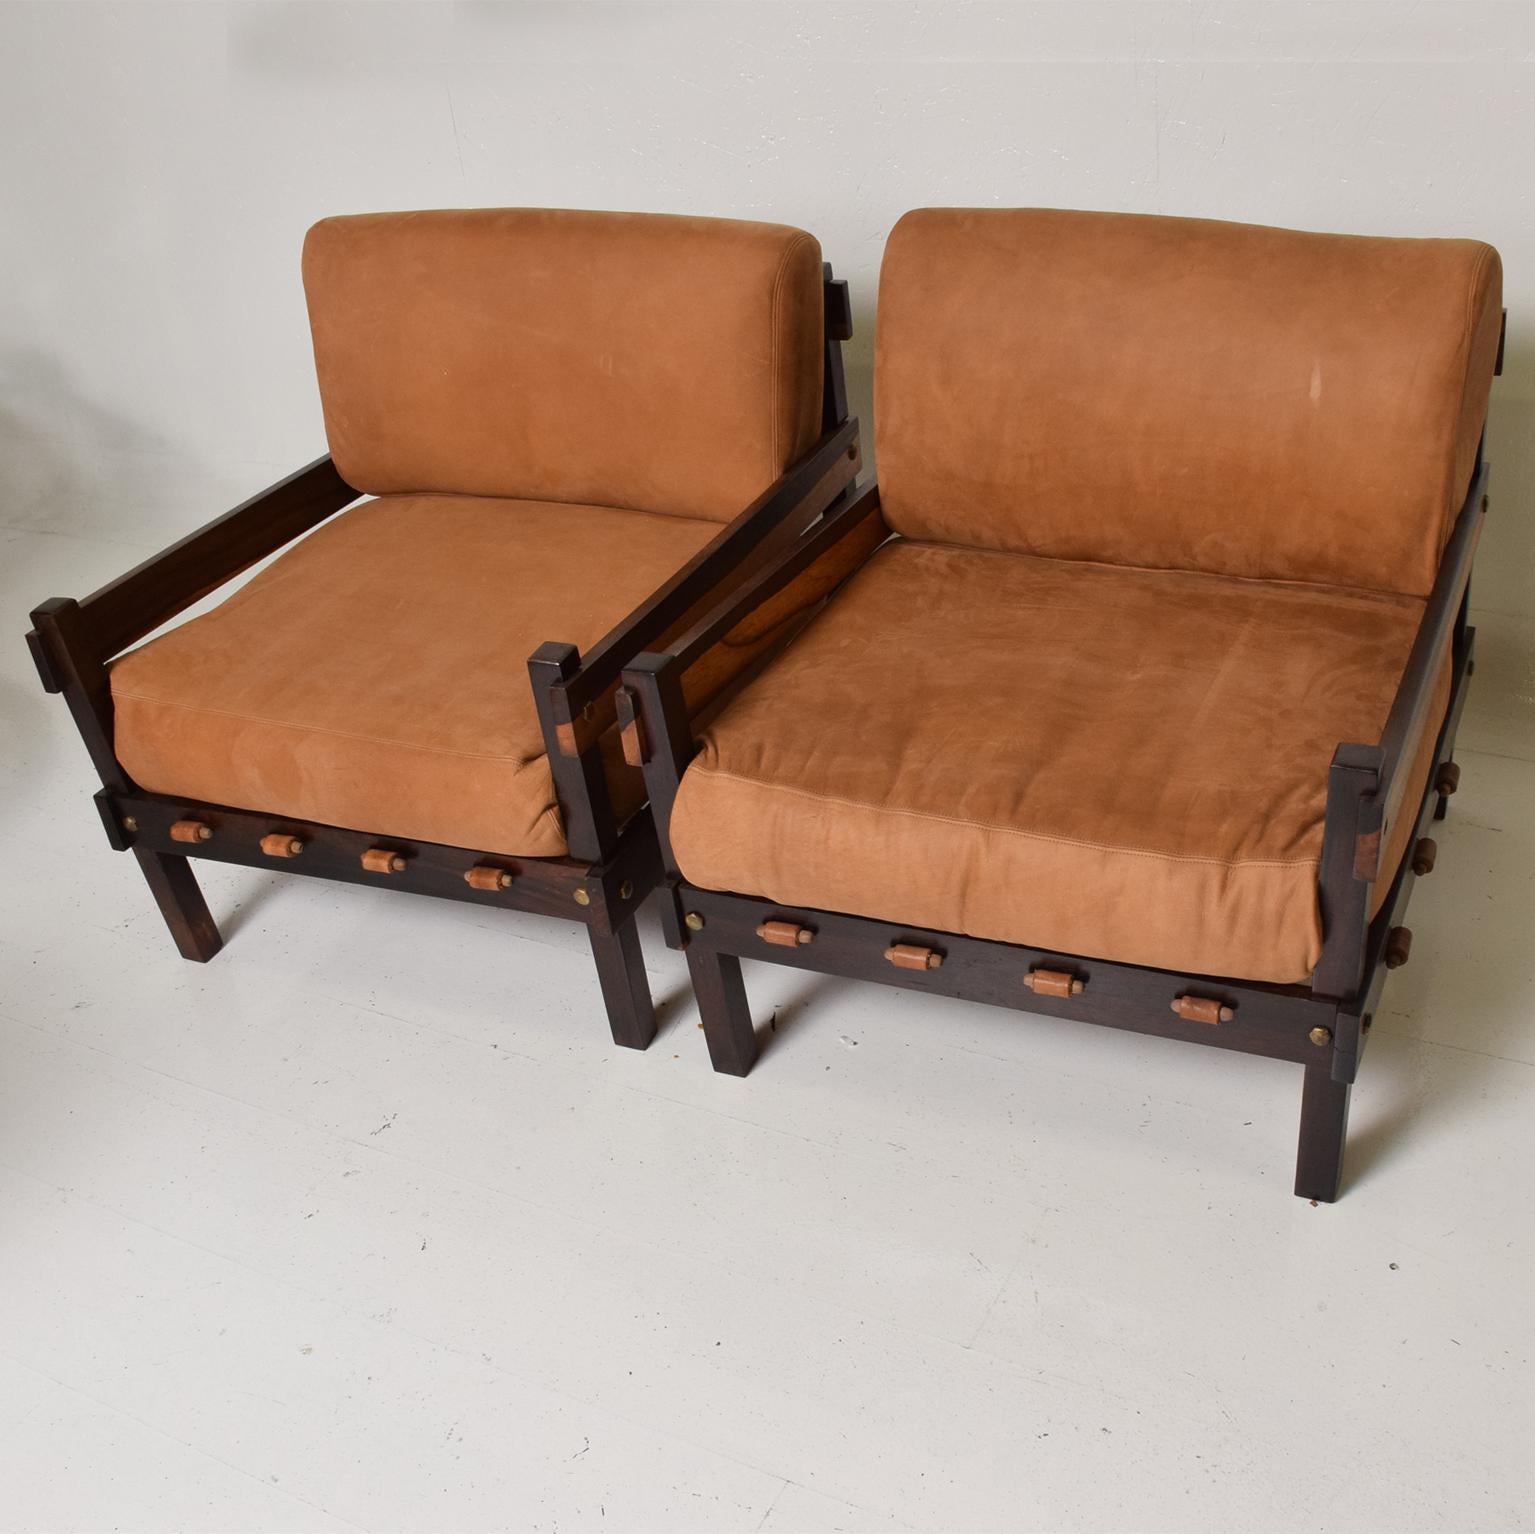 For your consideration, a Mid-Century Modern pair of Brazilian rosewood armchairs.
Solid Brazilian rosewood with brass accents and leather cushions. One chair retains original label.
Dimensions: 31